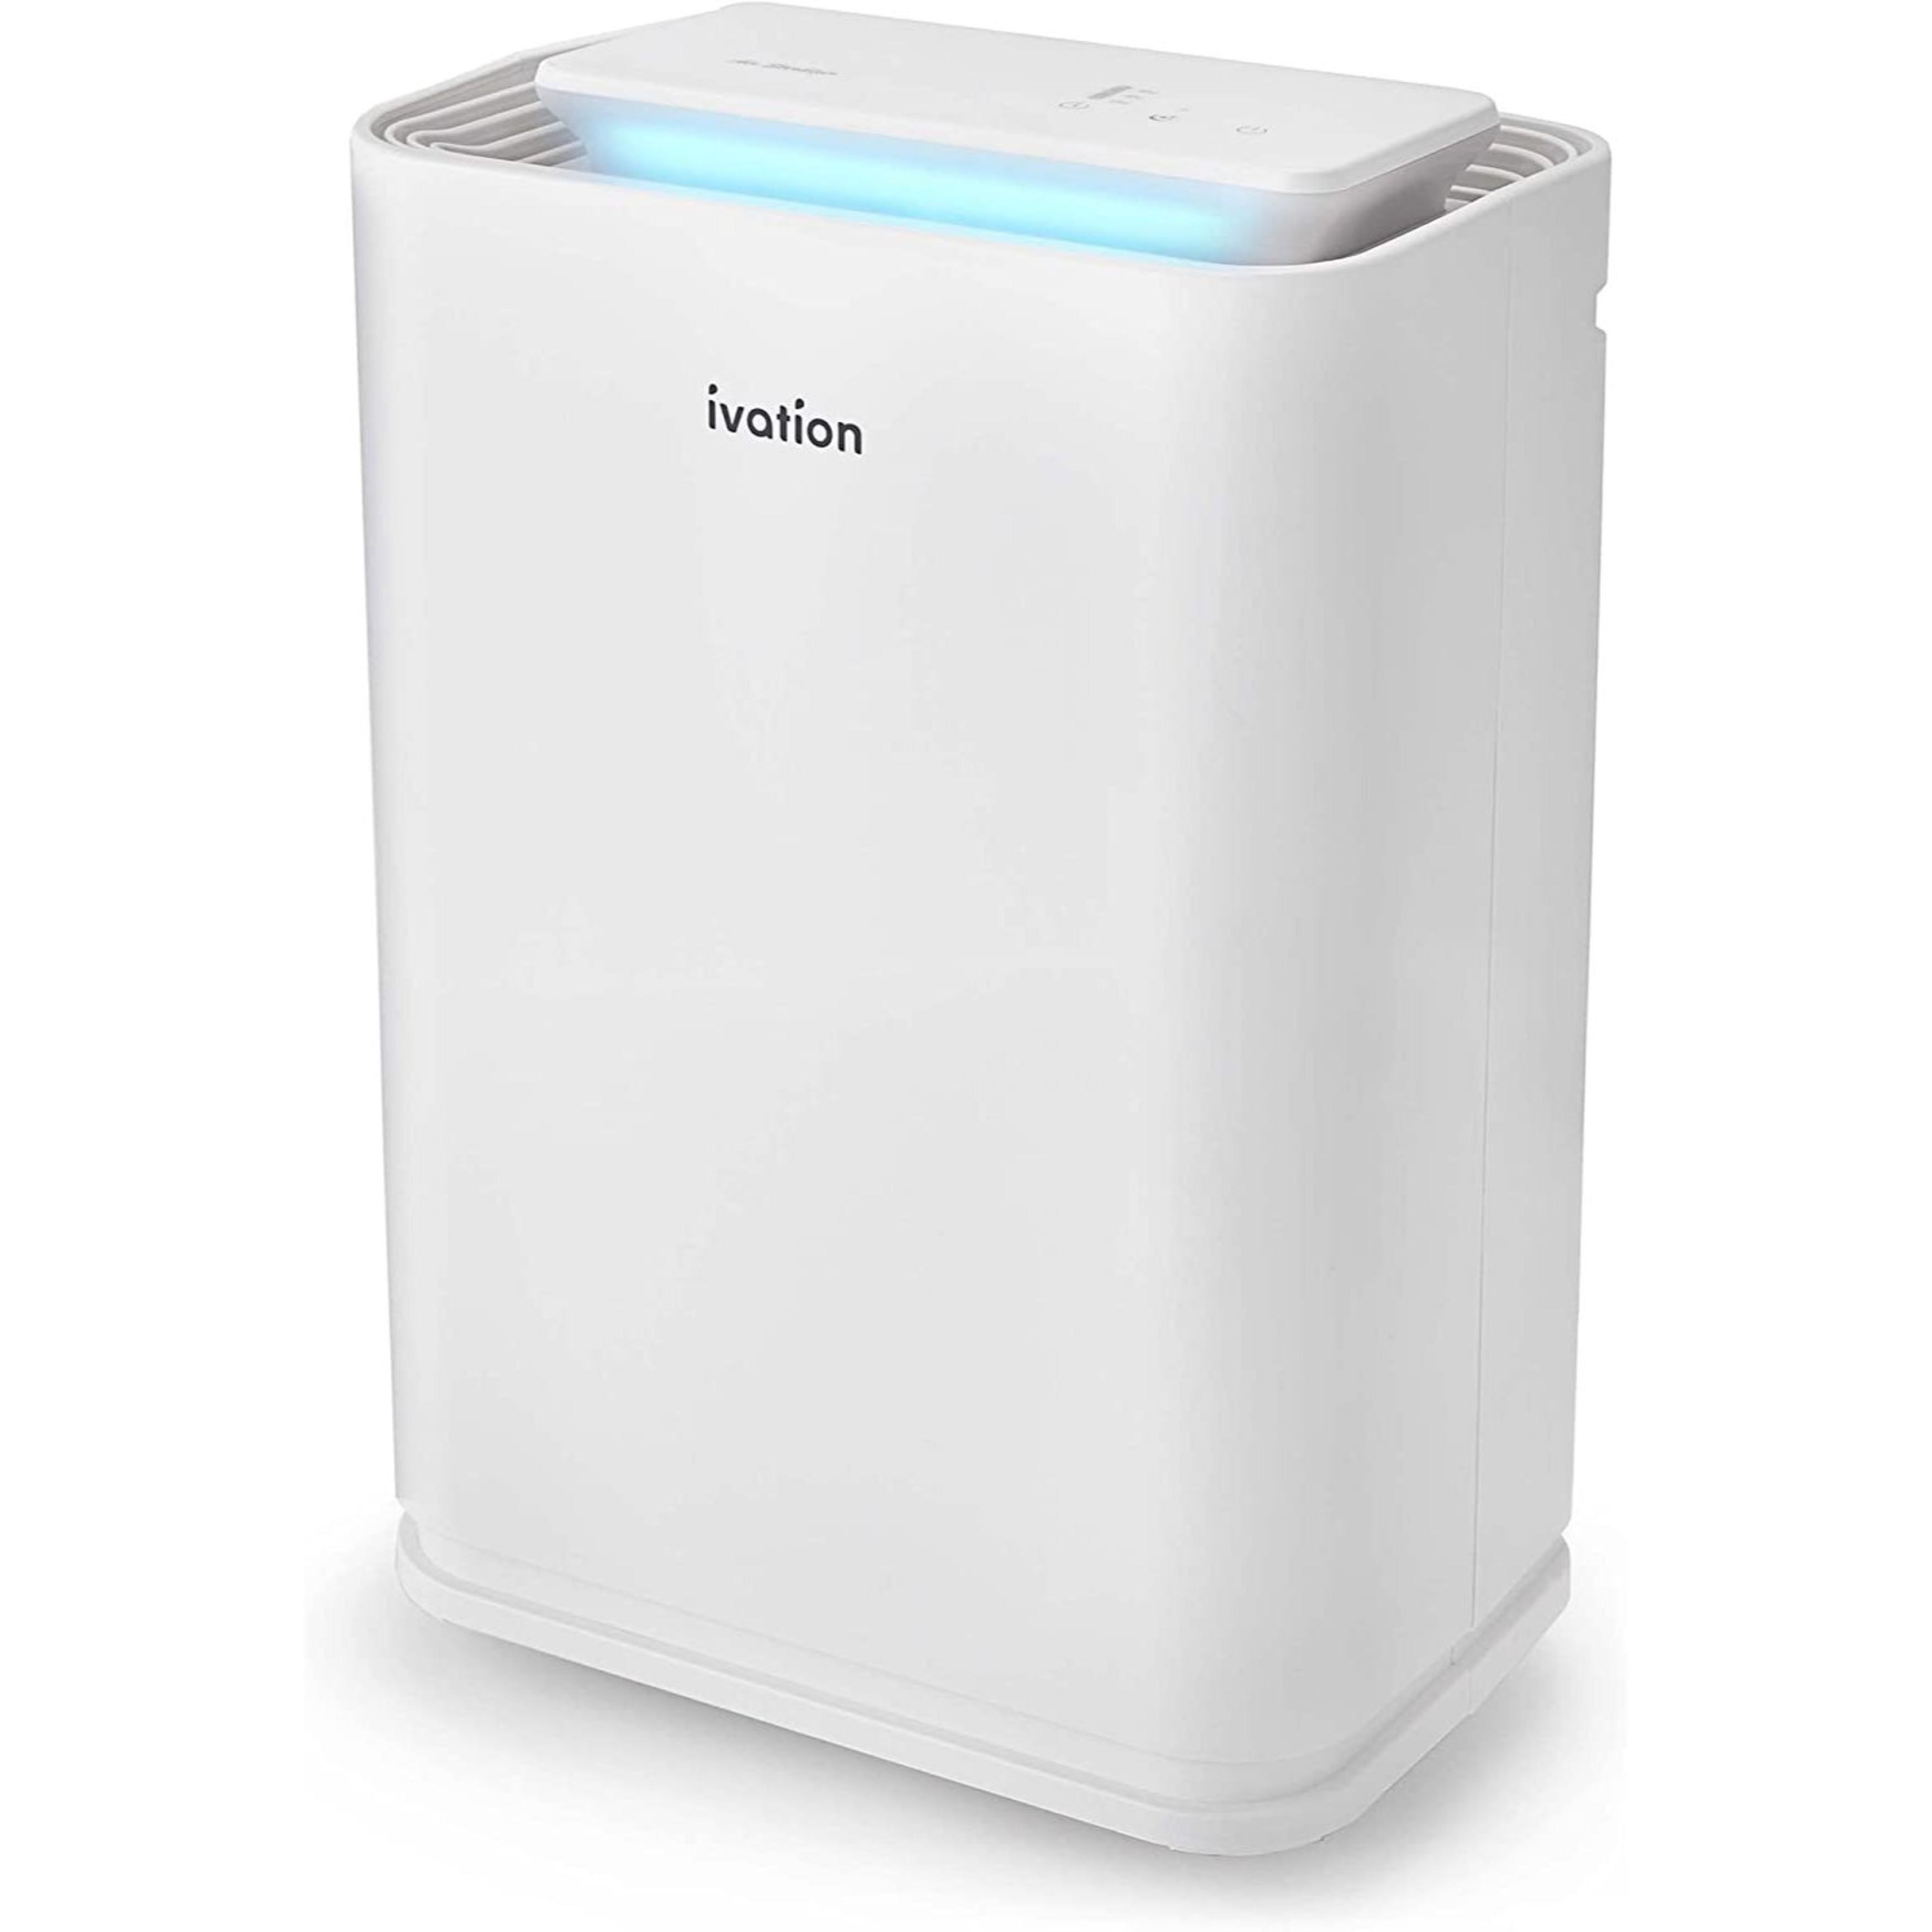 Ivation Compact Air Purifier for Home and Office with Timer